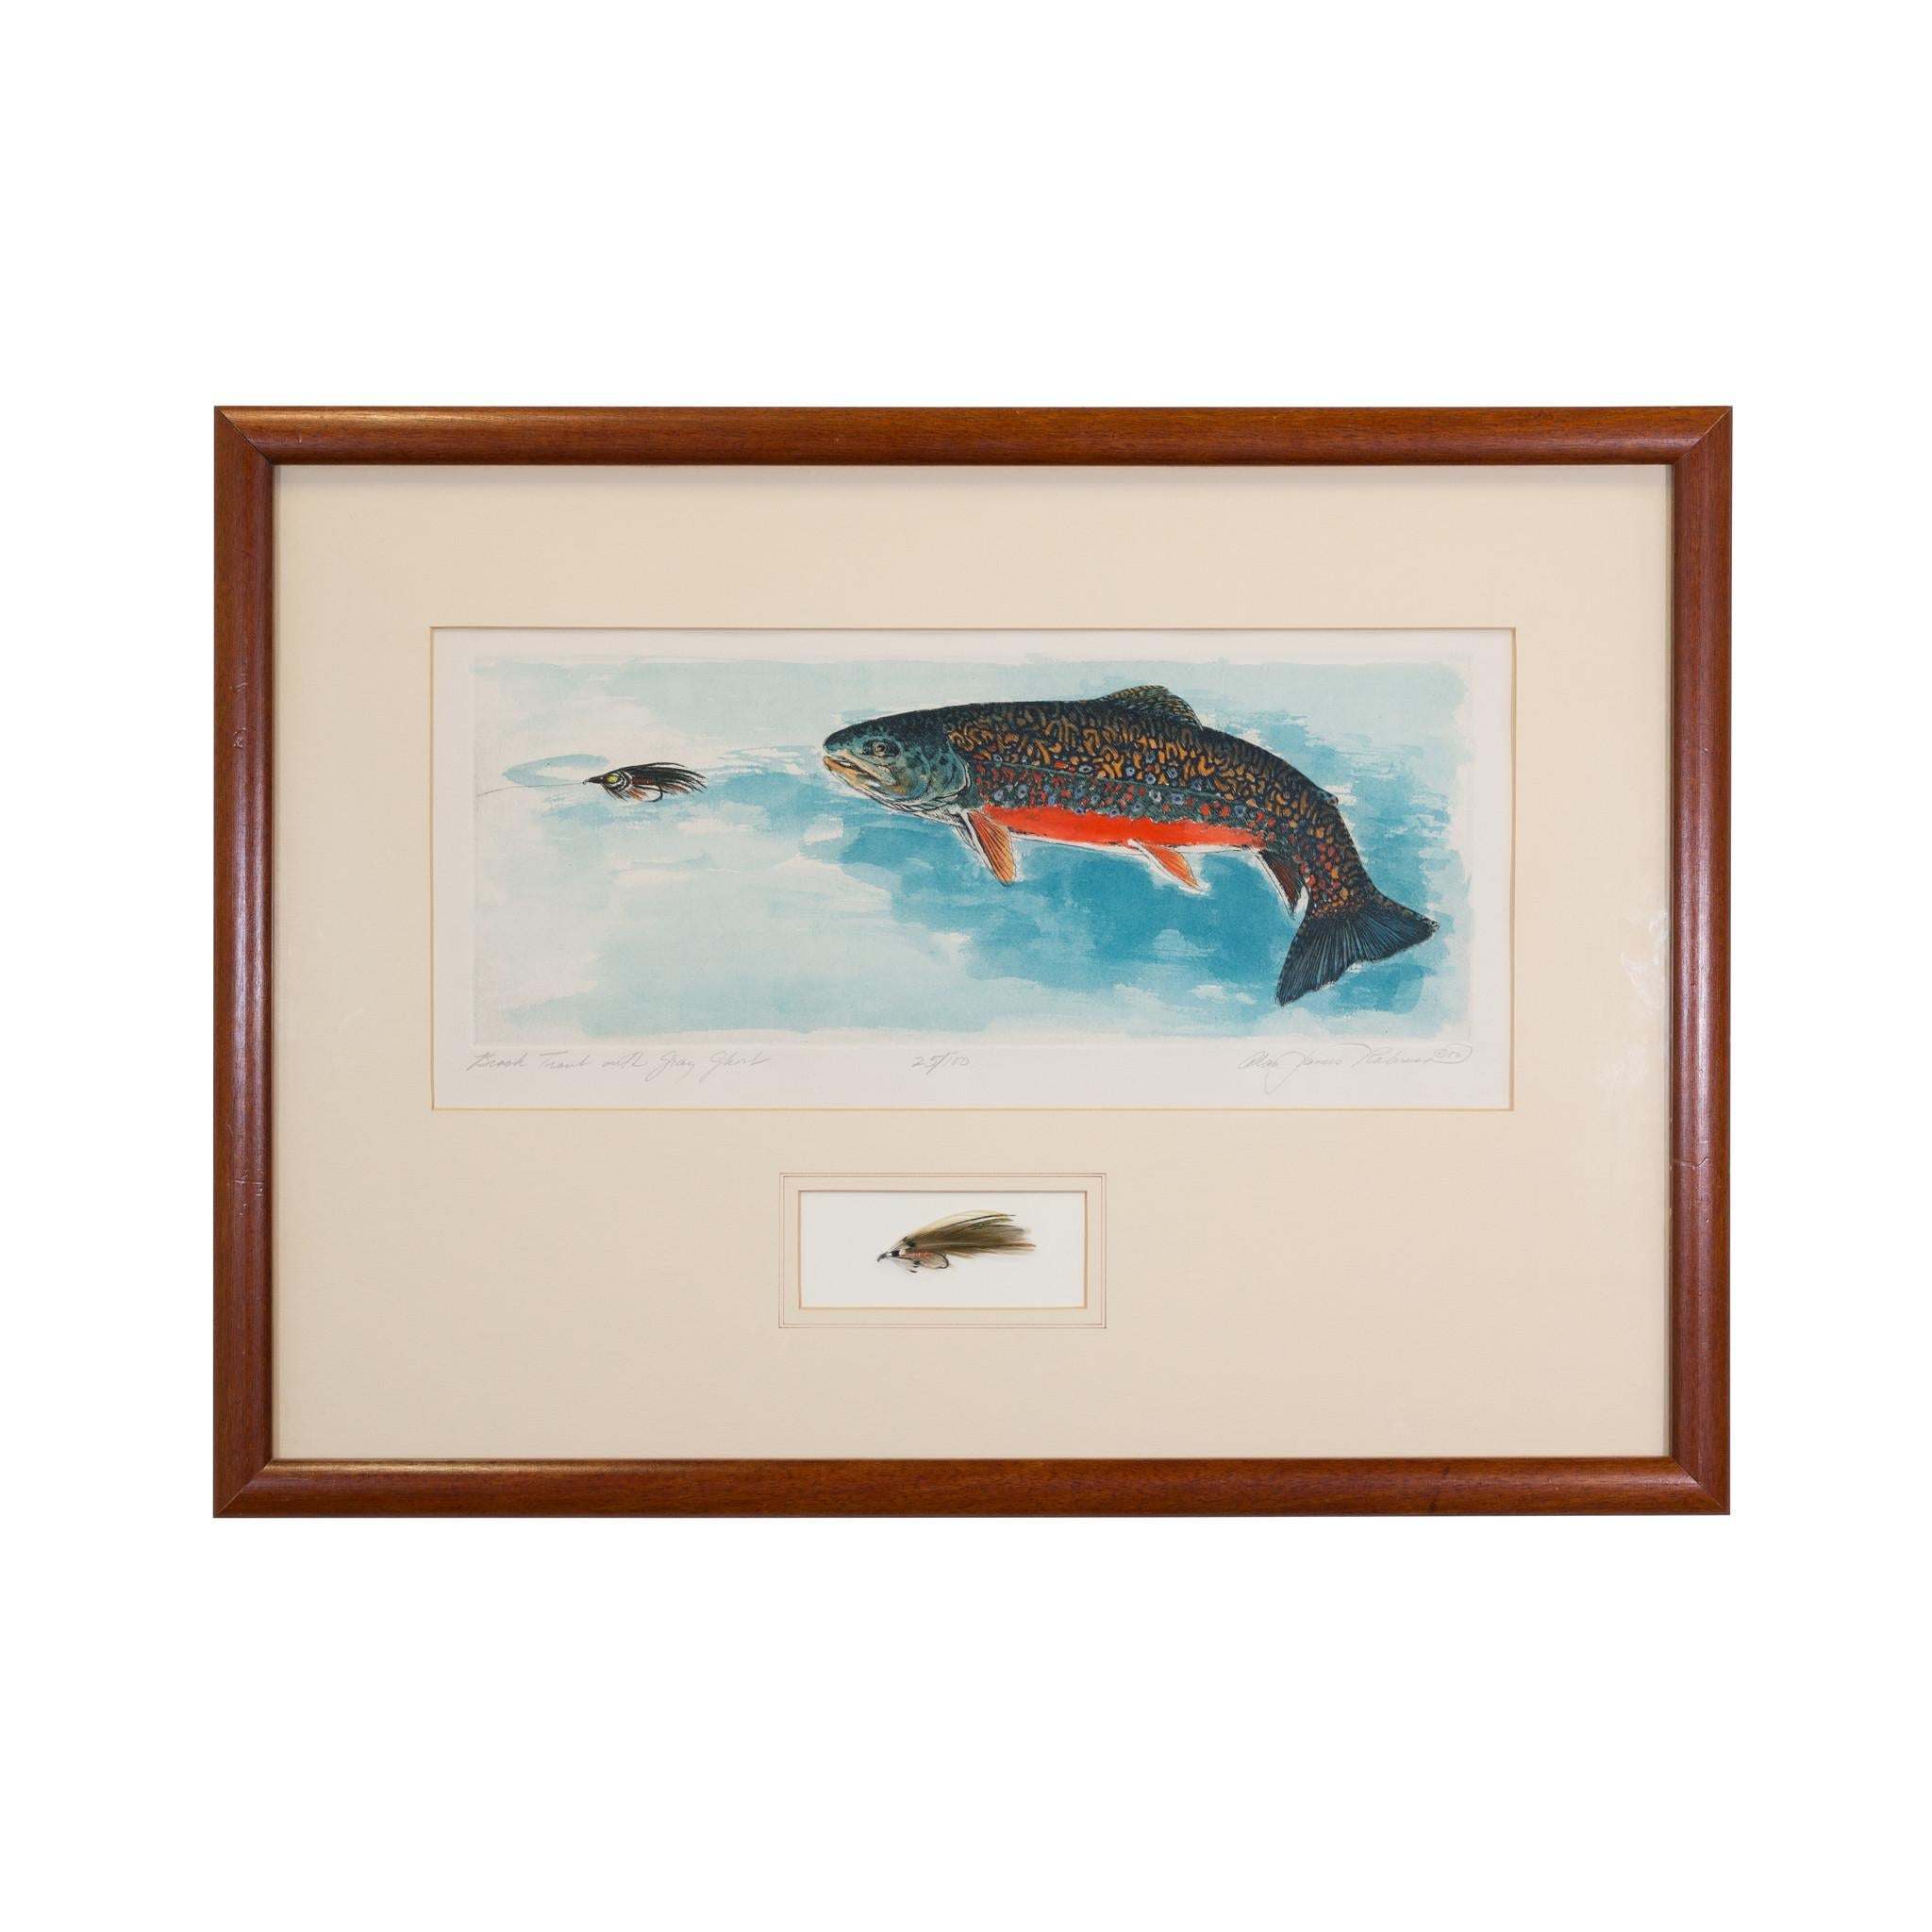 Late 20th Century Trout Engraving Watercolors with Flies by Alan James Robinson